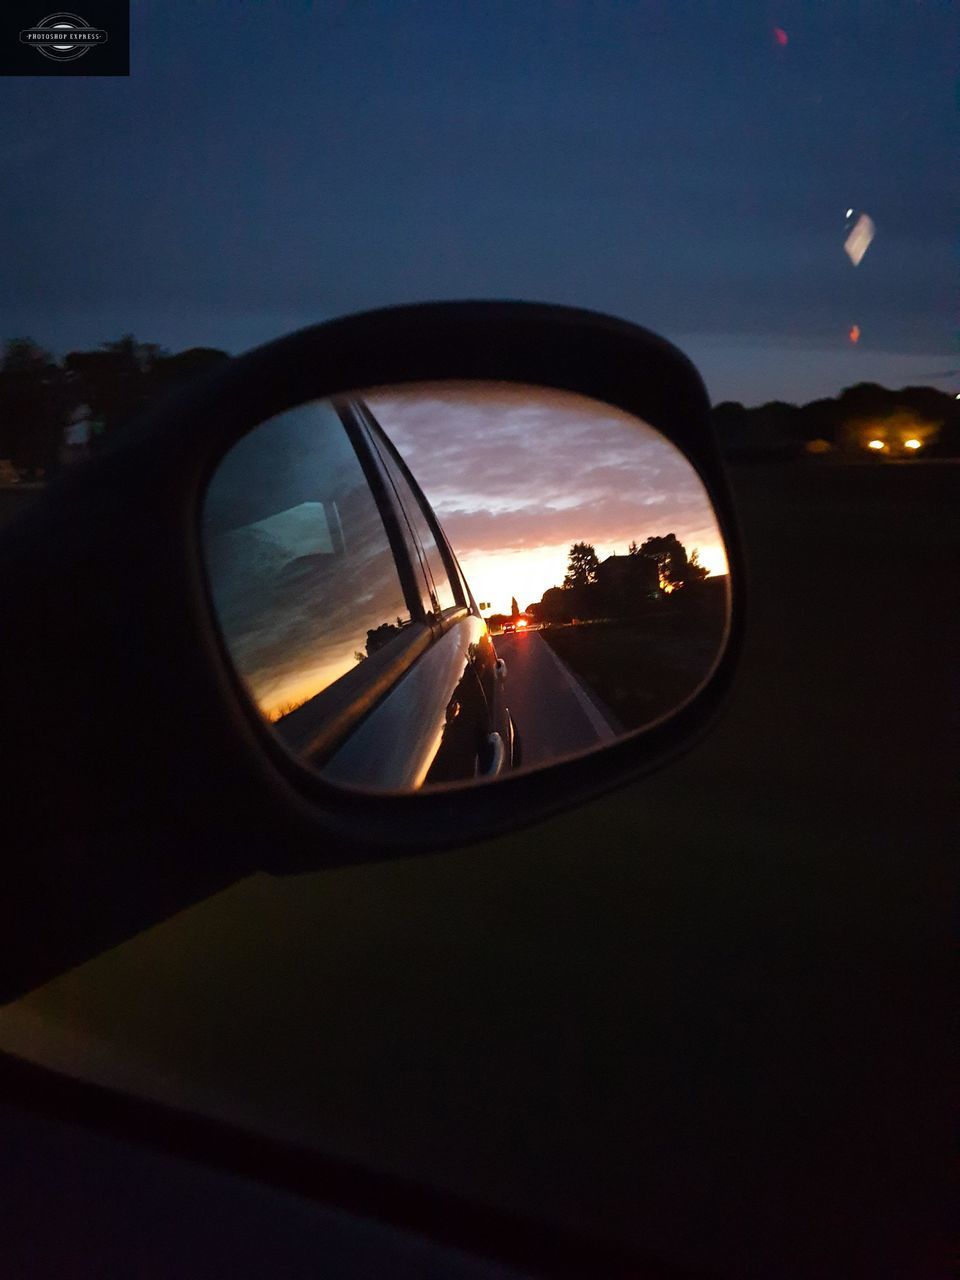 REFLECTION OF SUNSET IN SIDE-VIEW MIRROR